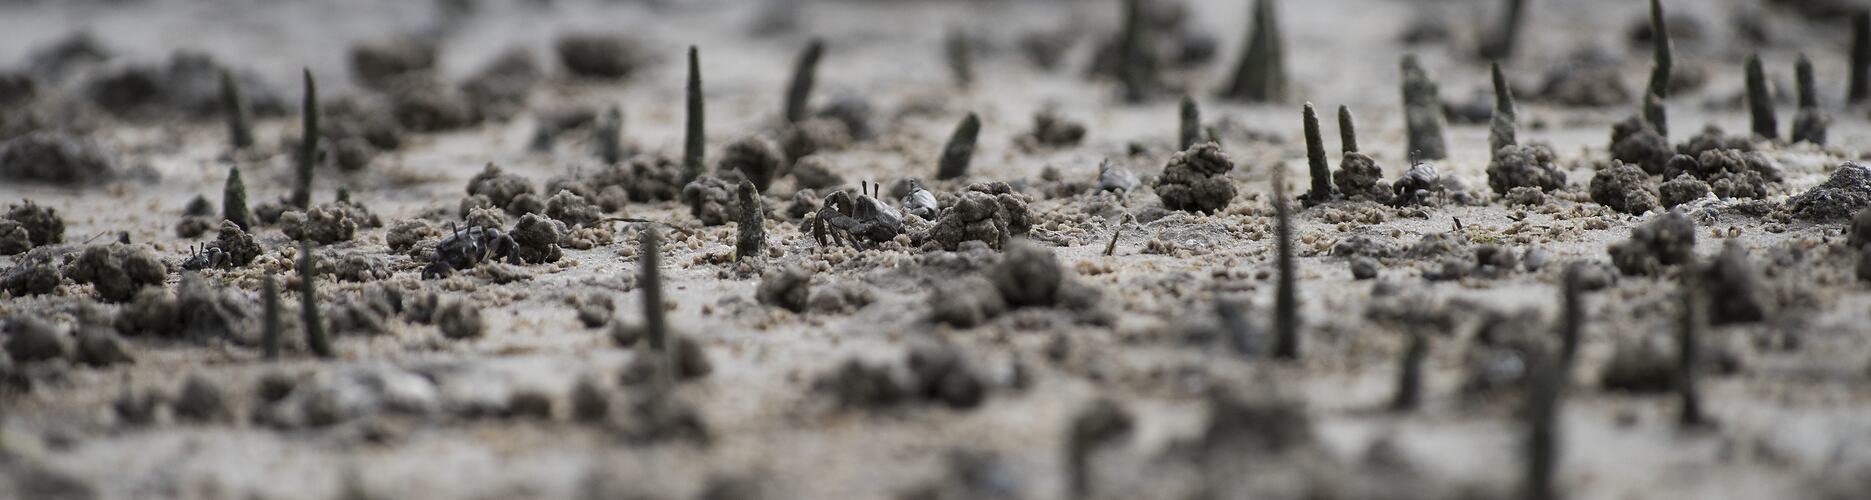 Dark crabs on sand with mangroves poking through.